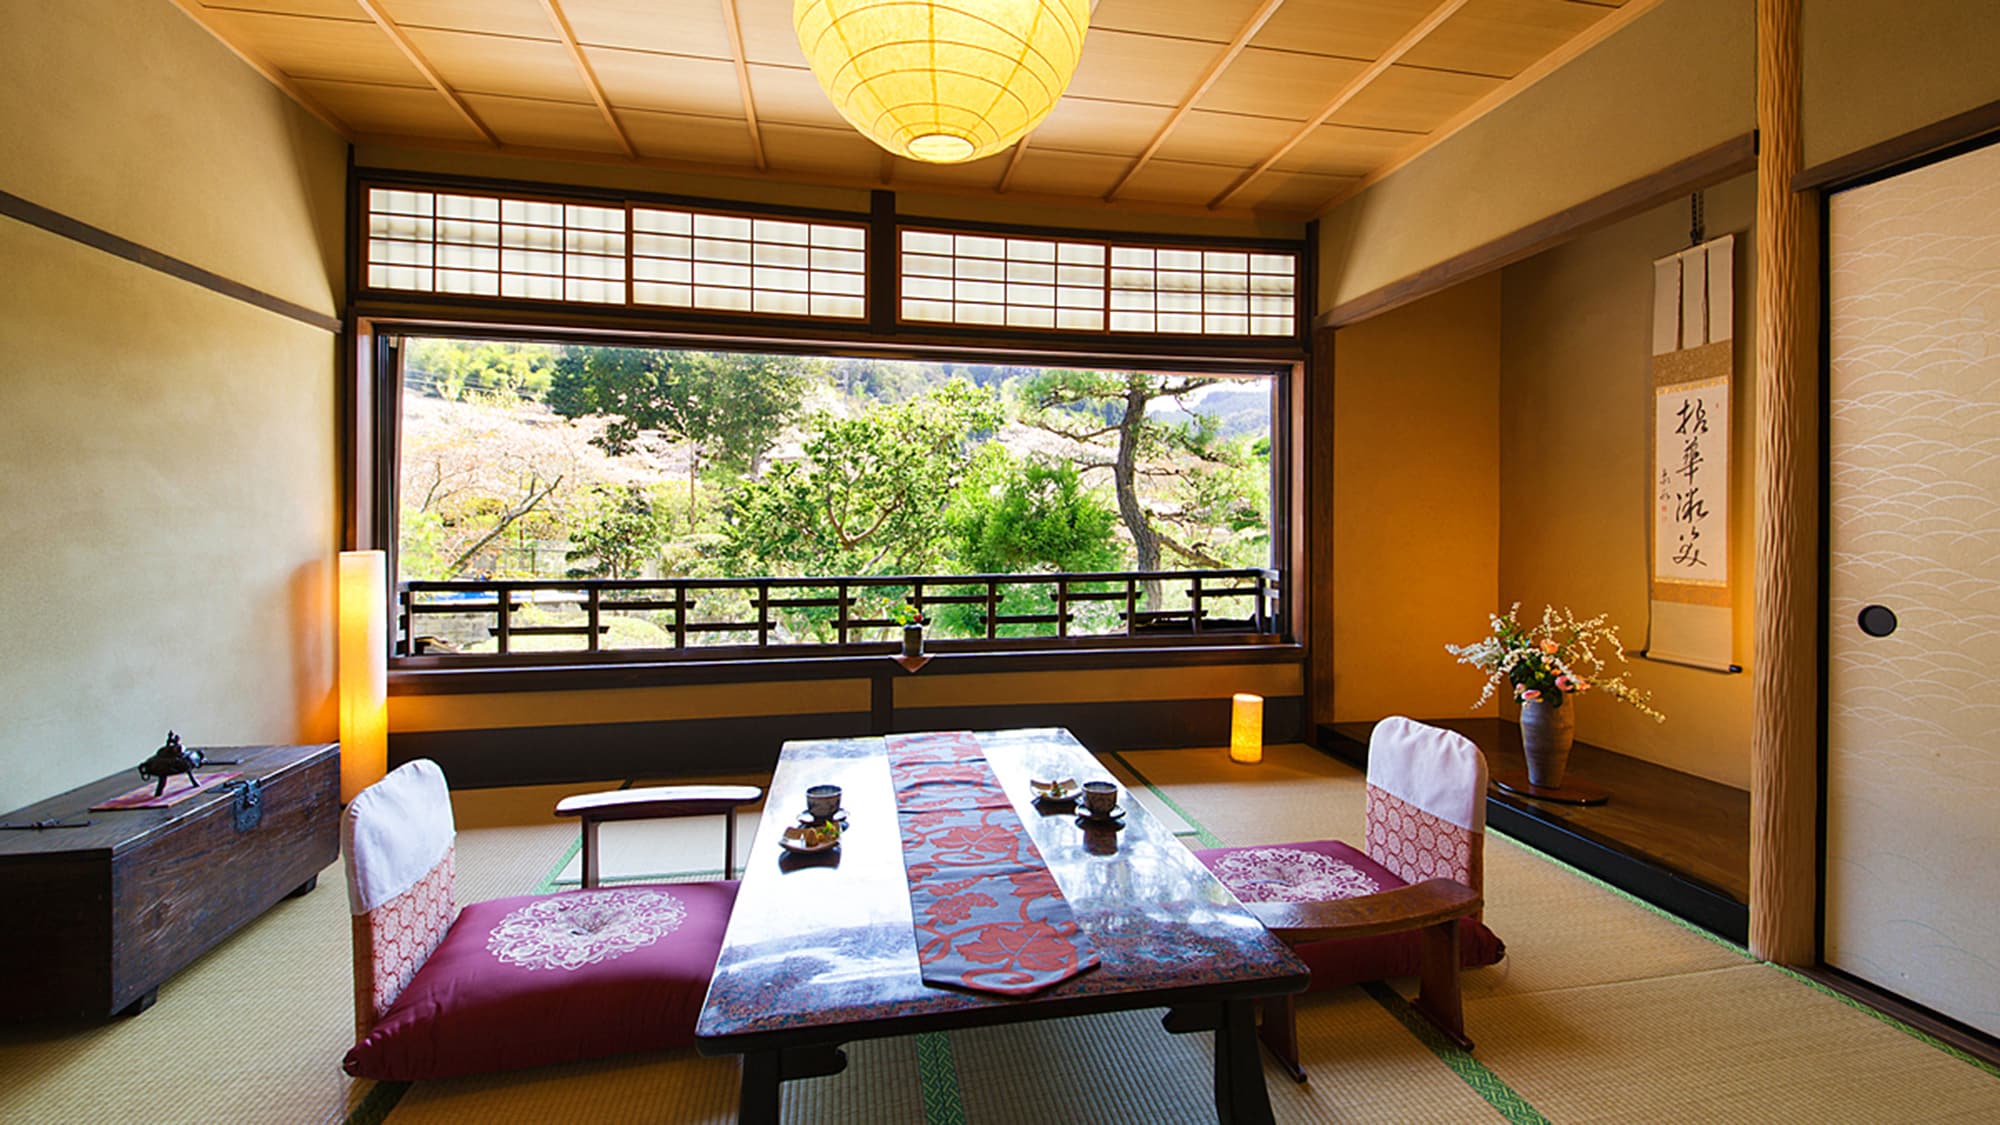 [KANGETSU-] & ldquo; Graceful and quiet & rdquo; Guest room with a beautiful view of nature